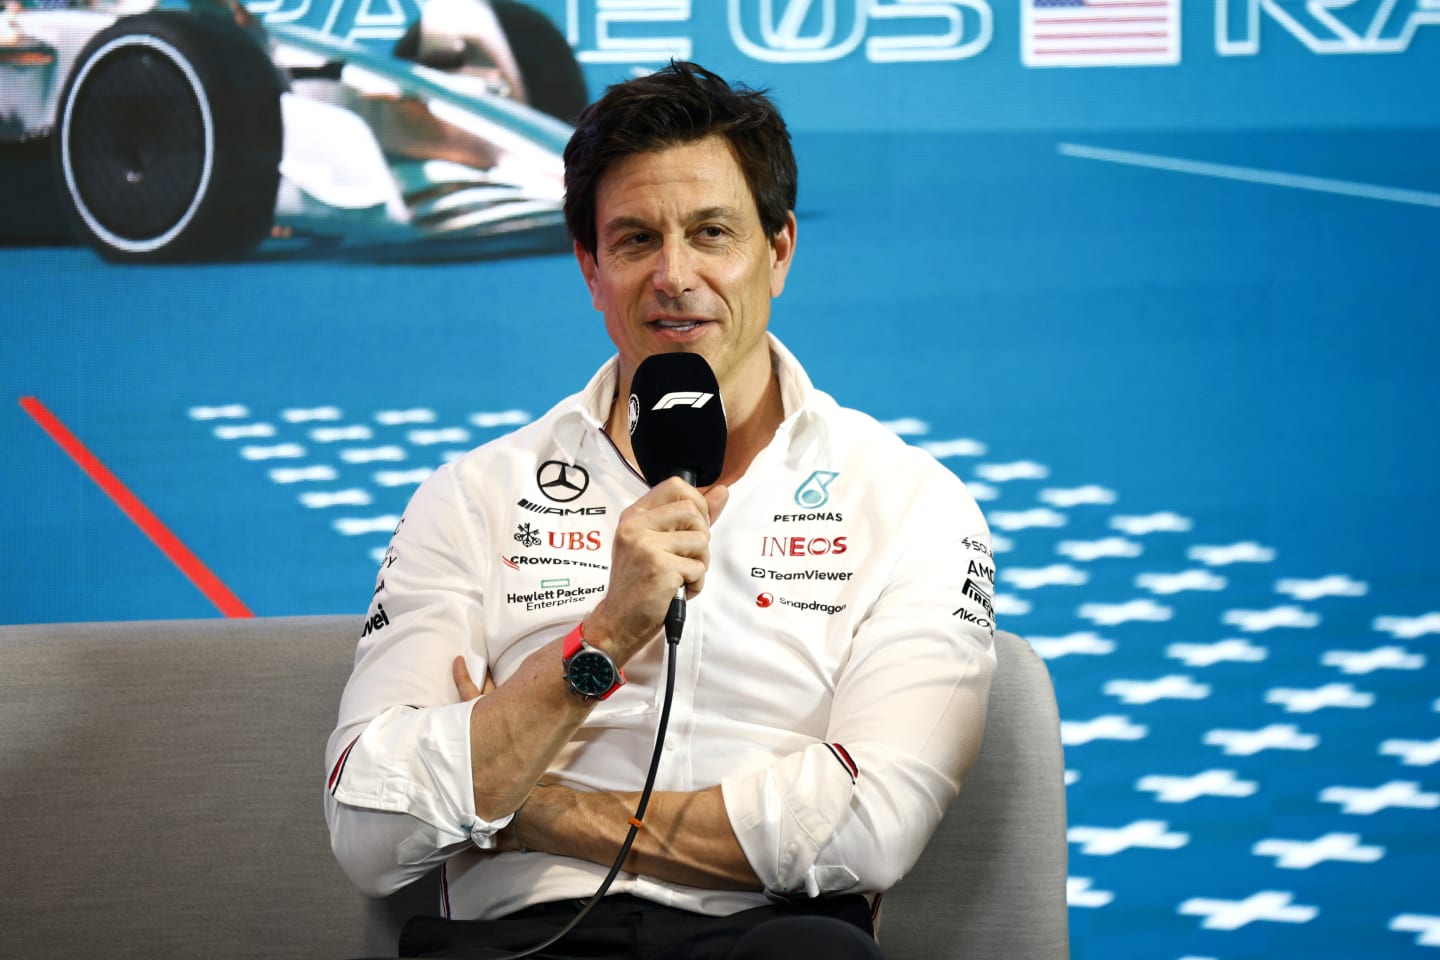 MIAMI, FLORIDA - MAY 05: Mercedes GP Executive Director Toto Wolff attends the Team Principals Press Conference during practice ahead of the F1 Grand Prix of Miami at Miami International Autodrome on May 05, 2023 in Miami, Florida. (Photo by Jared C. Tilton/Getty Images)